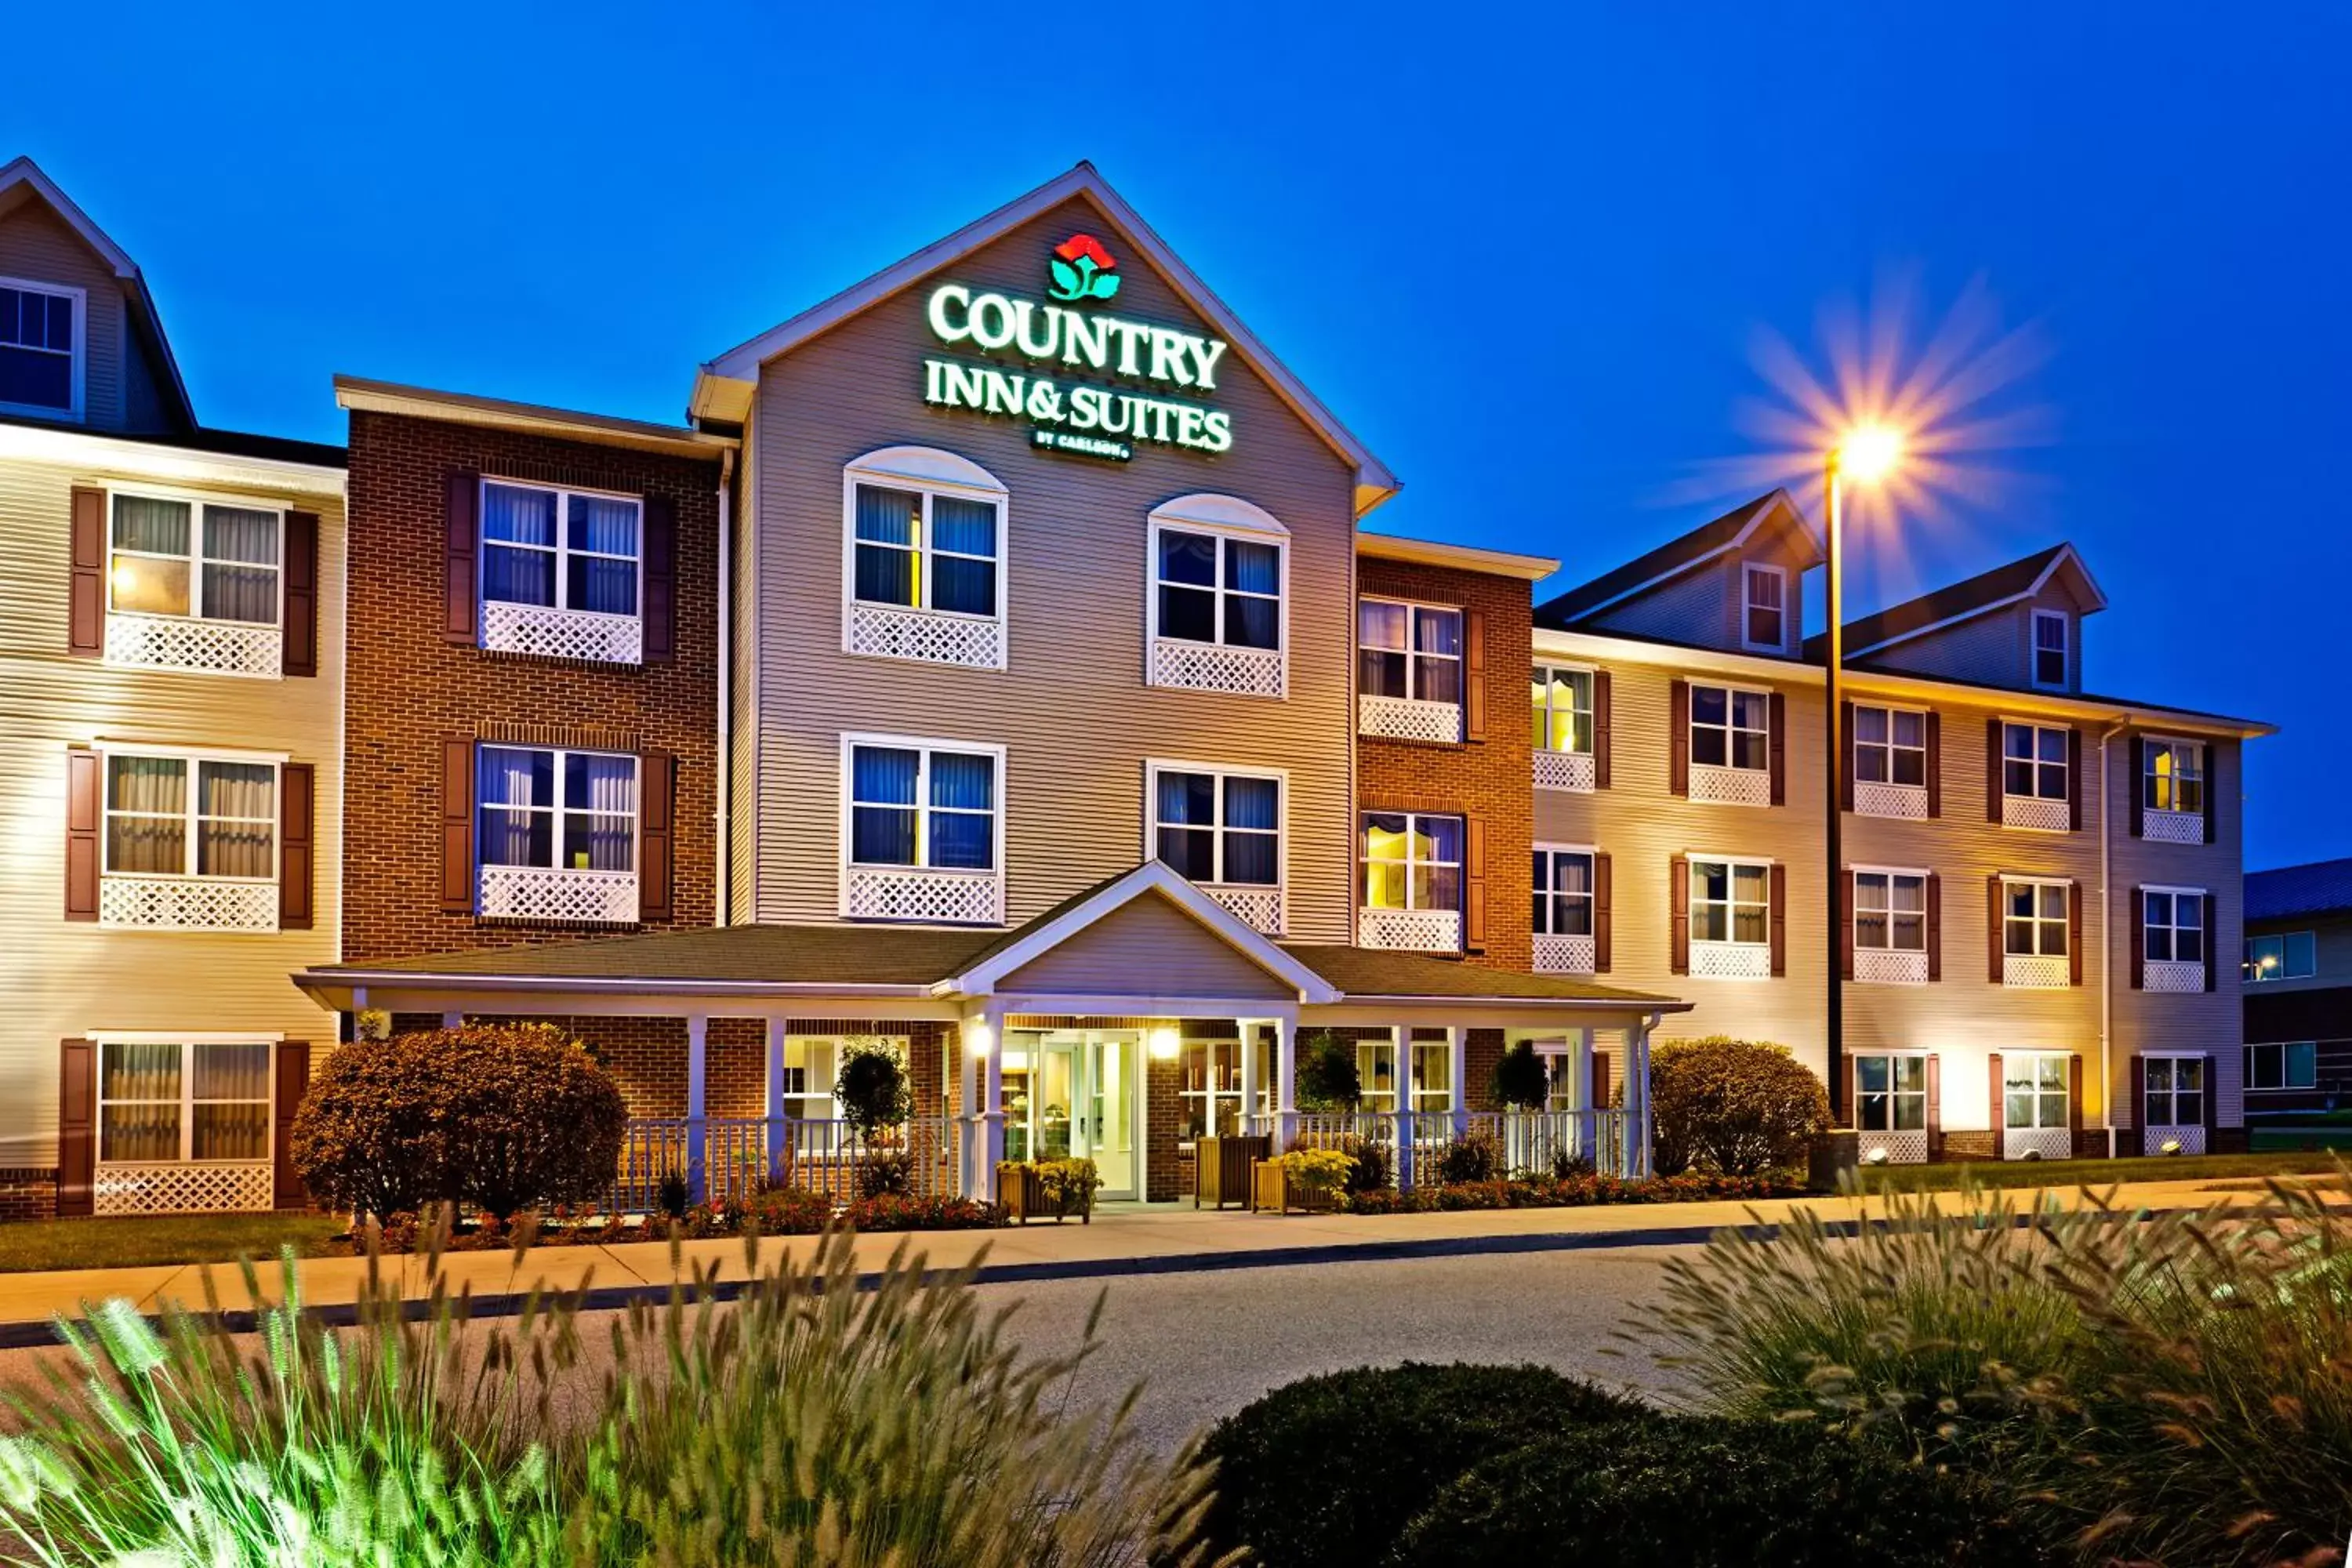 Facade/entrance, Property Building in Country Inn & Suites by Radisson, York, PA